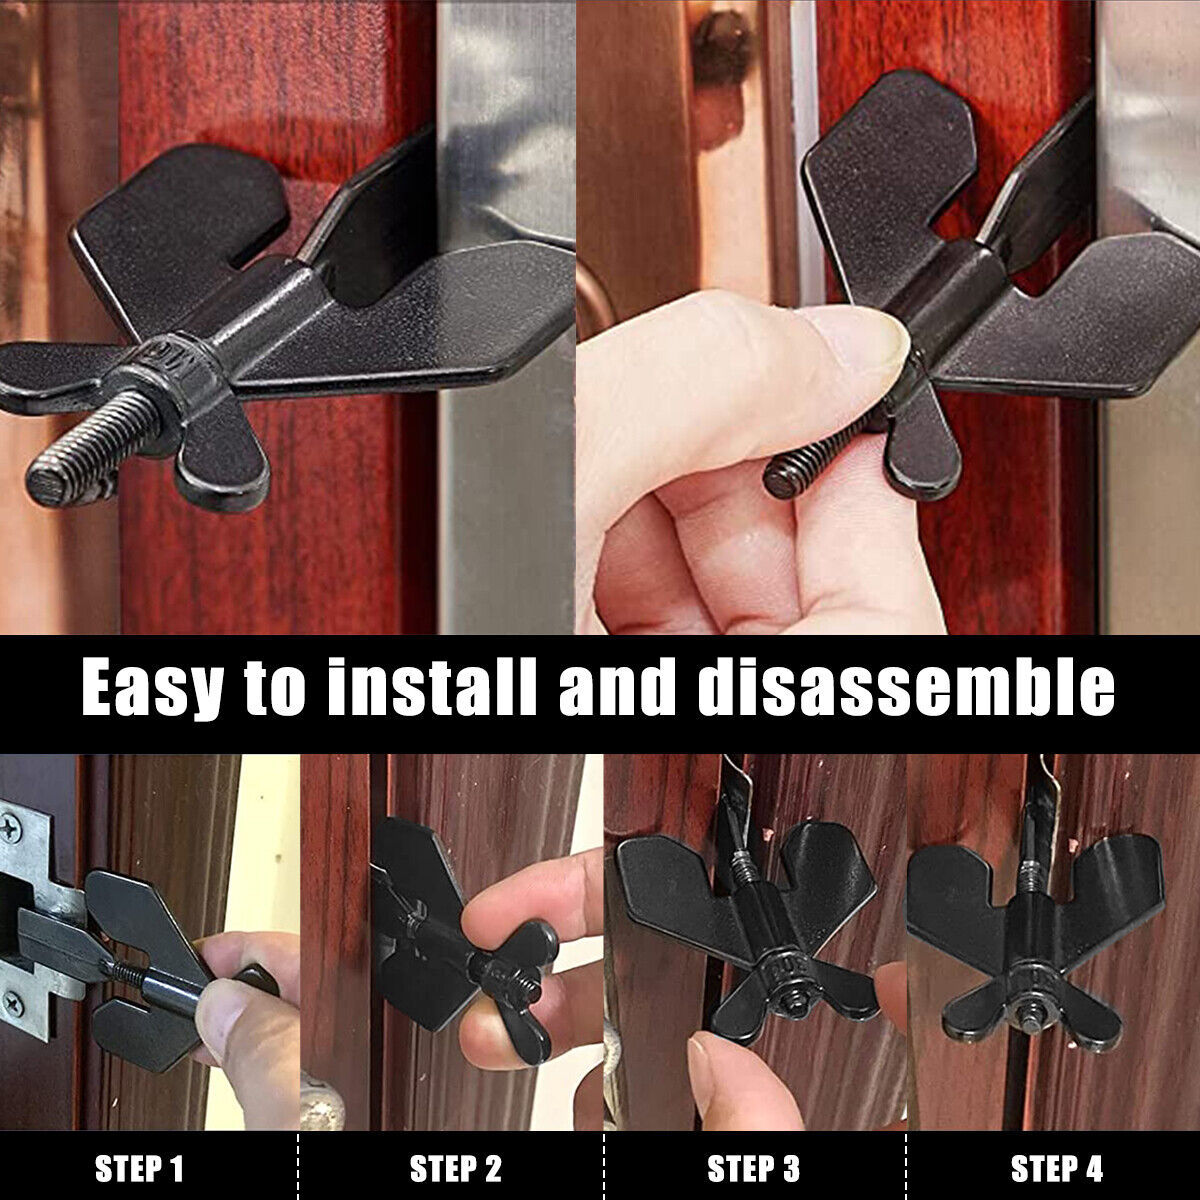 Portable Door Lock Home Security Hotel Safety Stainless Steel Privacy Extra Security Lock anti Theft 